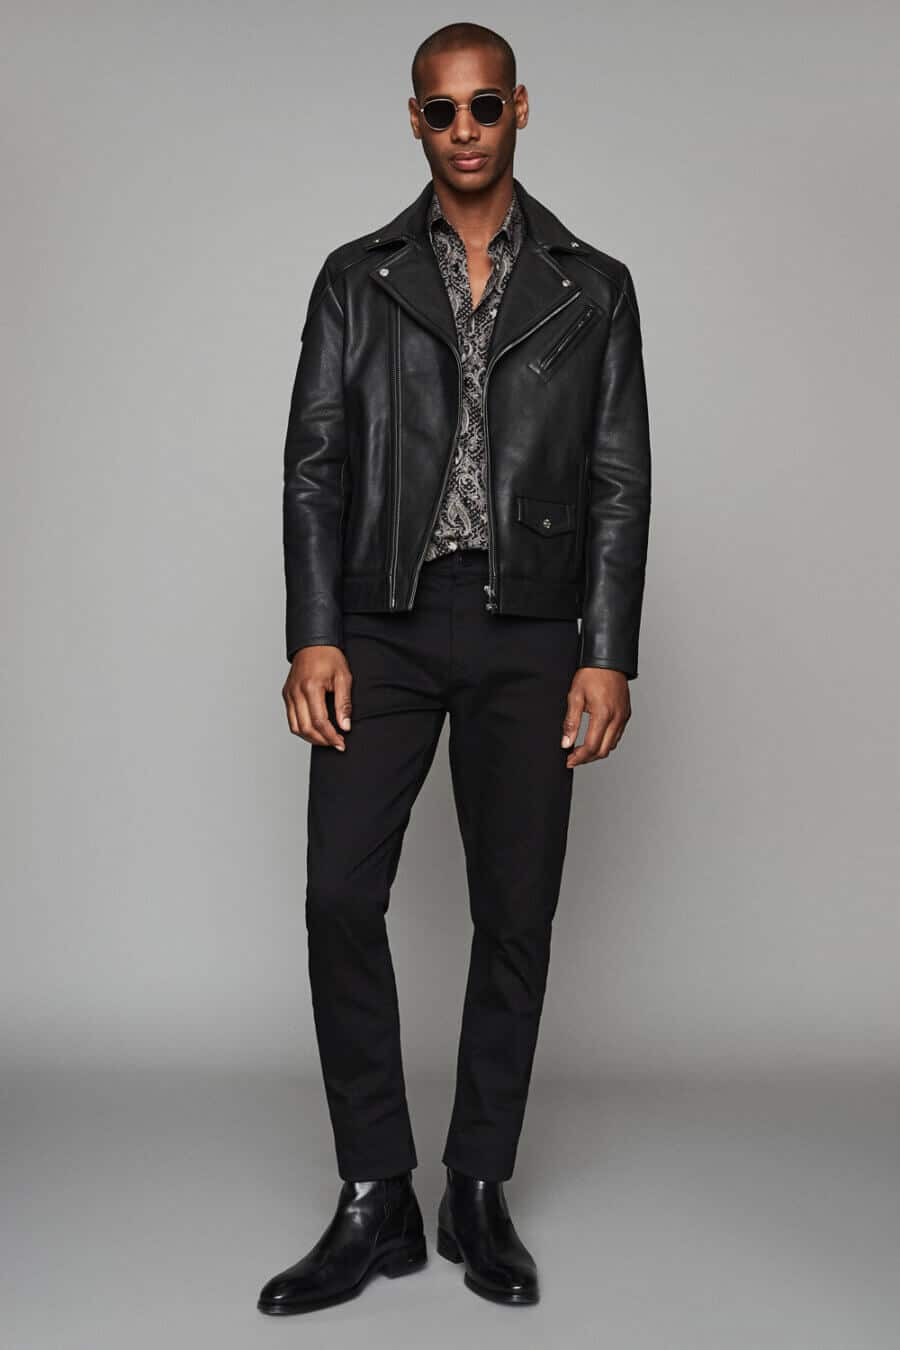 Men's black leather biker jacket, patterned shirt, jeans and boots outfit